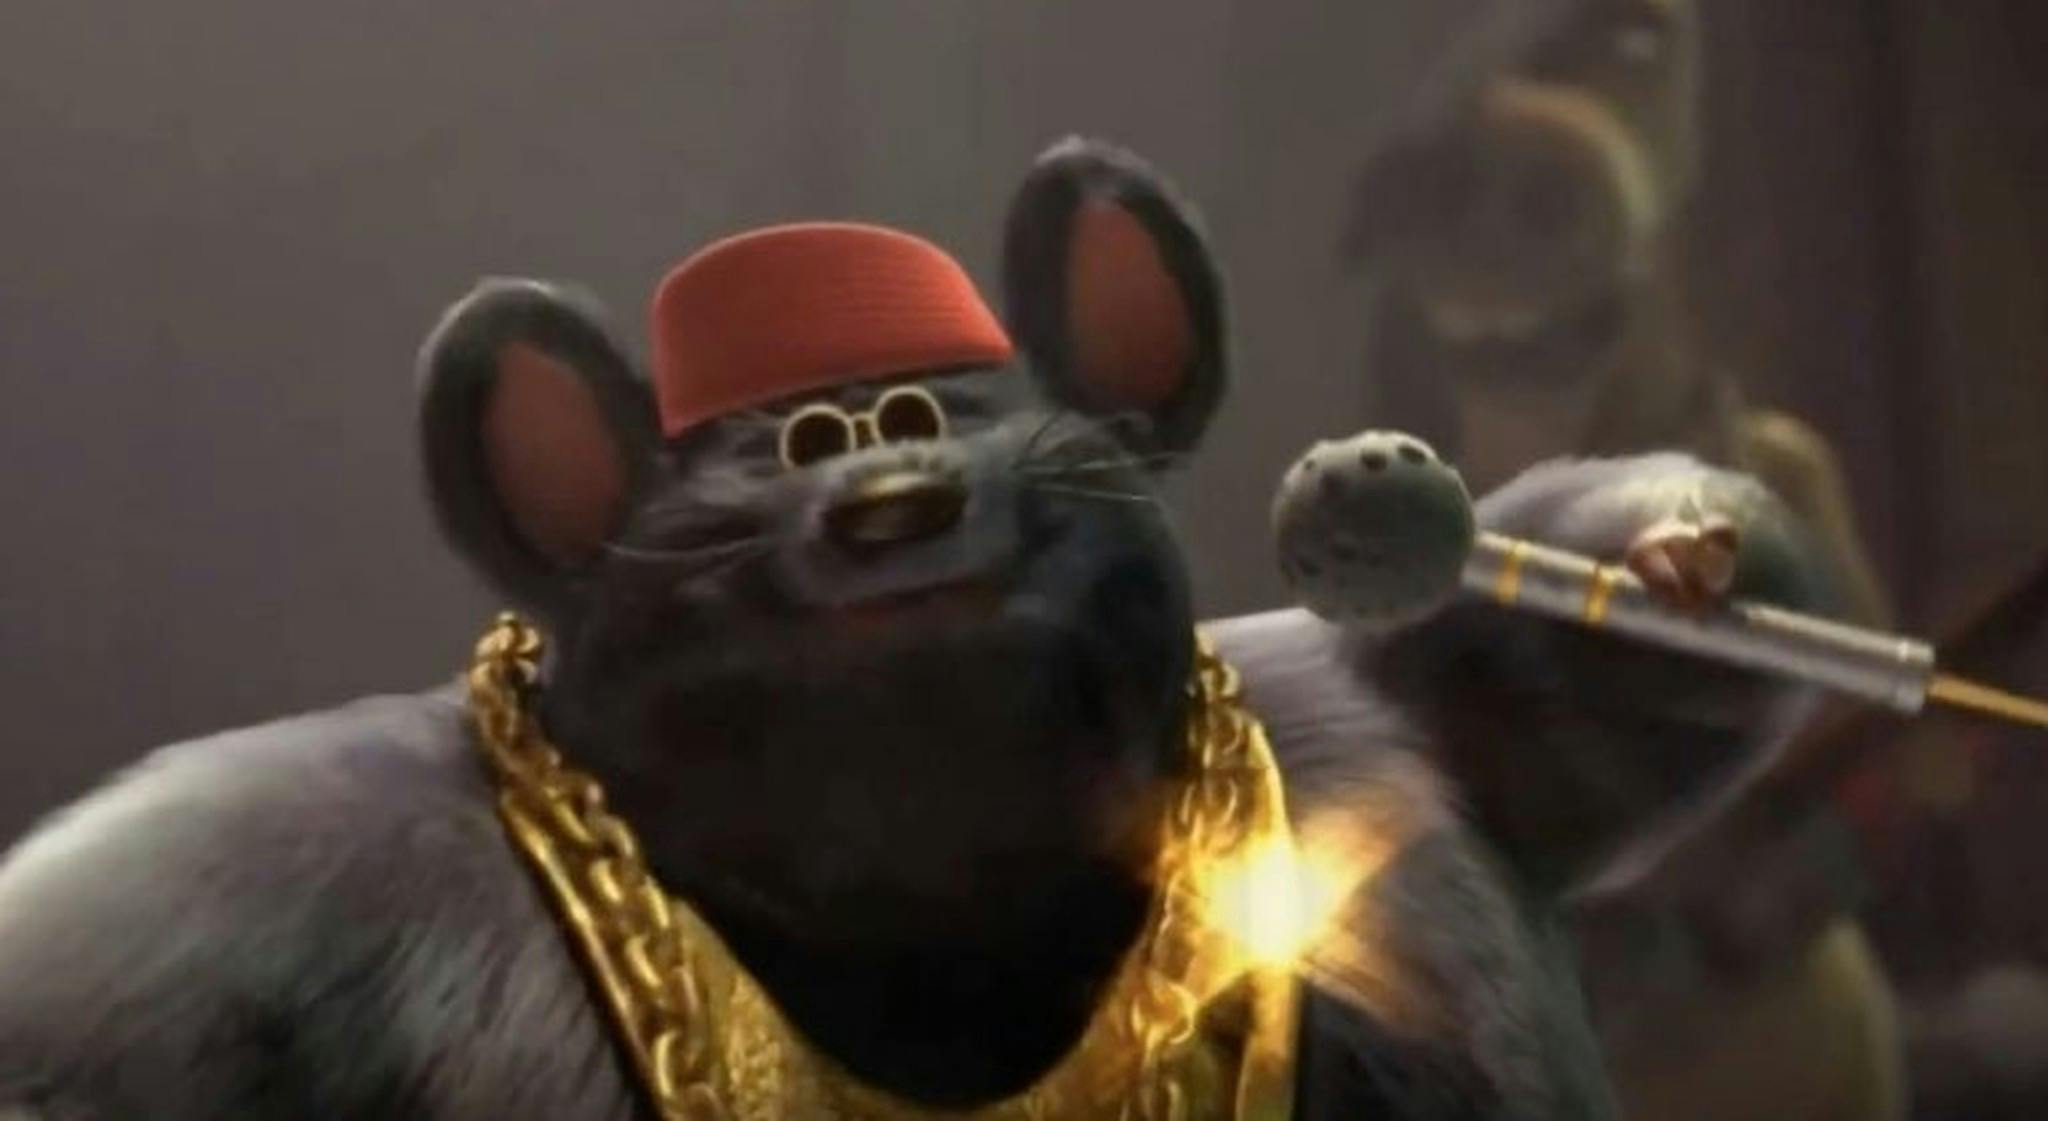 [B!] Biggie Cheese, the rapping mouse from 'Barnyard,' makes the